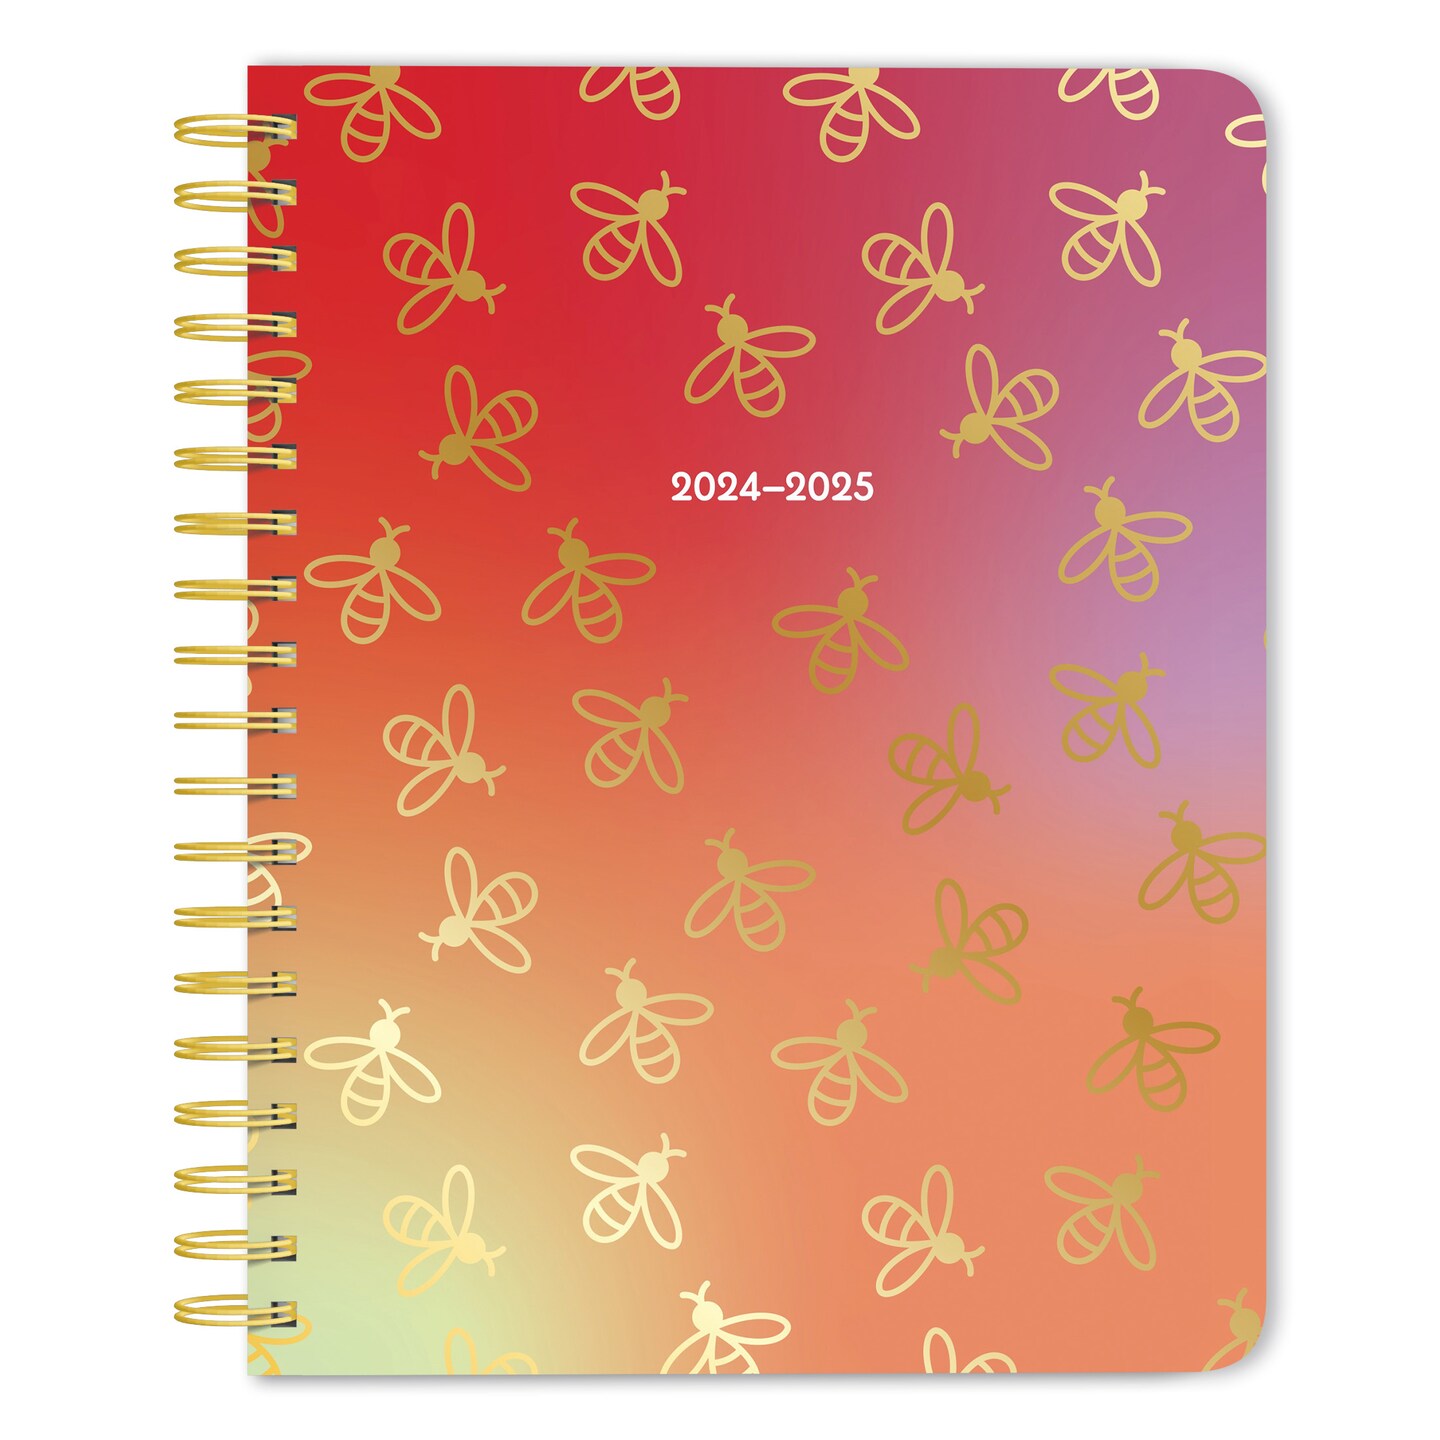 Busy Bees | 2025 6 x 7.75 Inch 18 Months Weekly Desk Planner | Foil Stamped Cover | July 2024 - December 2025 | Plato | Planning Stationery